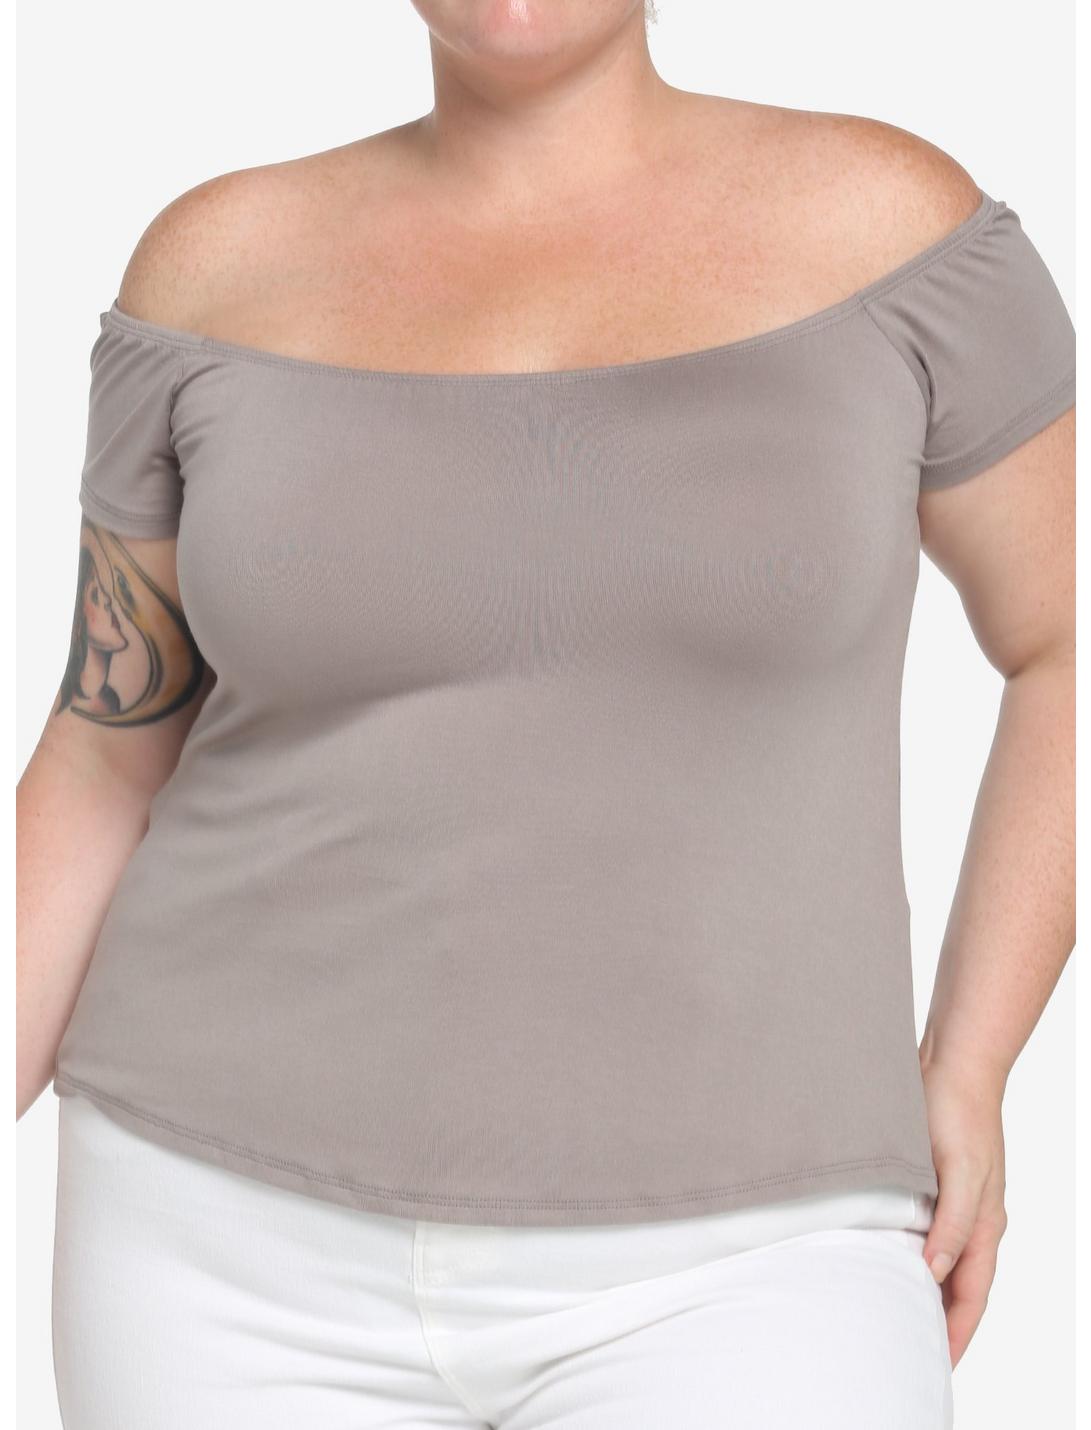 Taupe Off-The-Shoulder Top Plus Size, TAUPE, hi-res